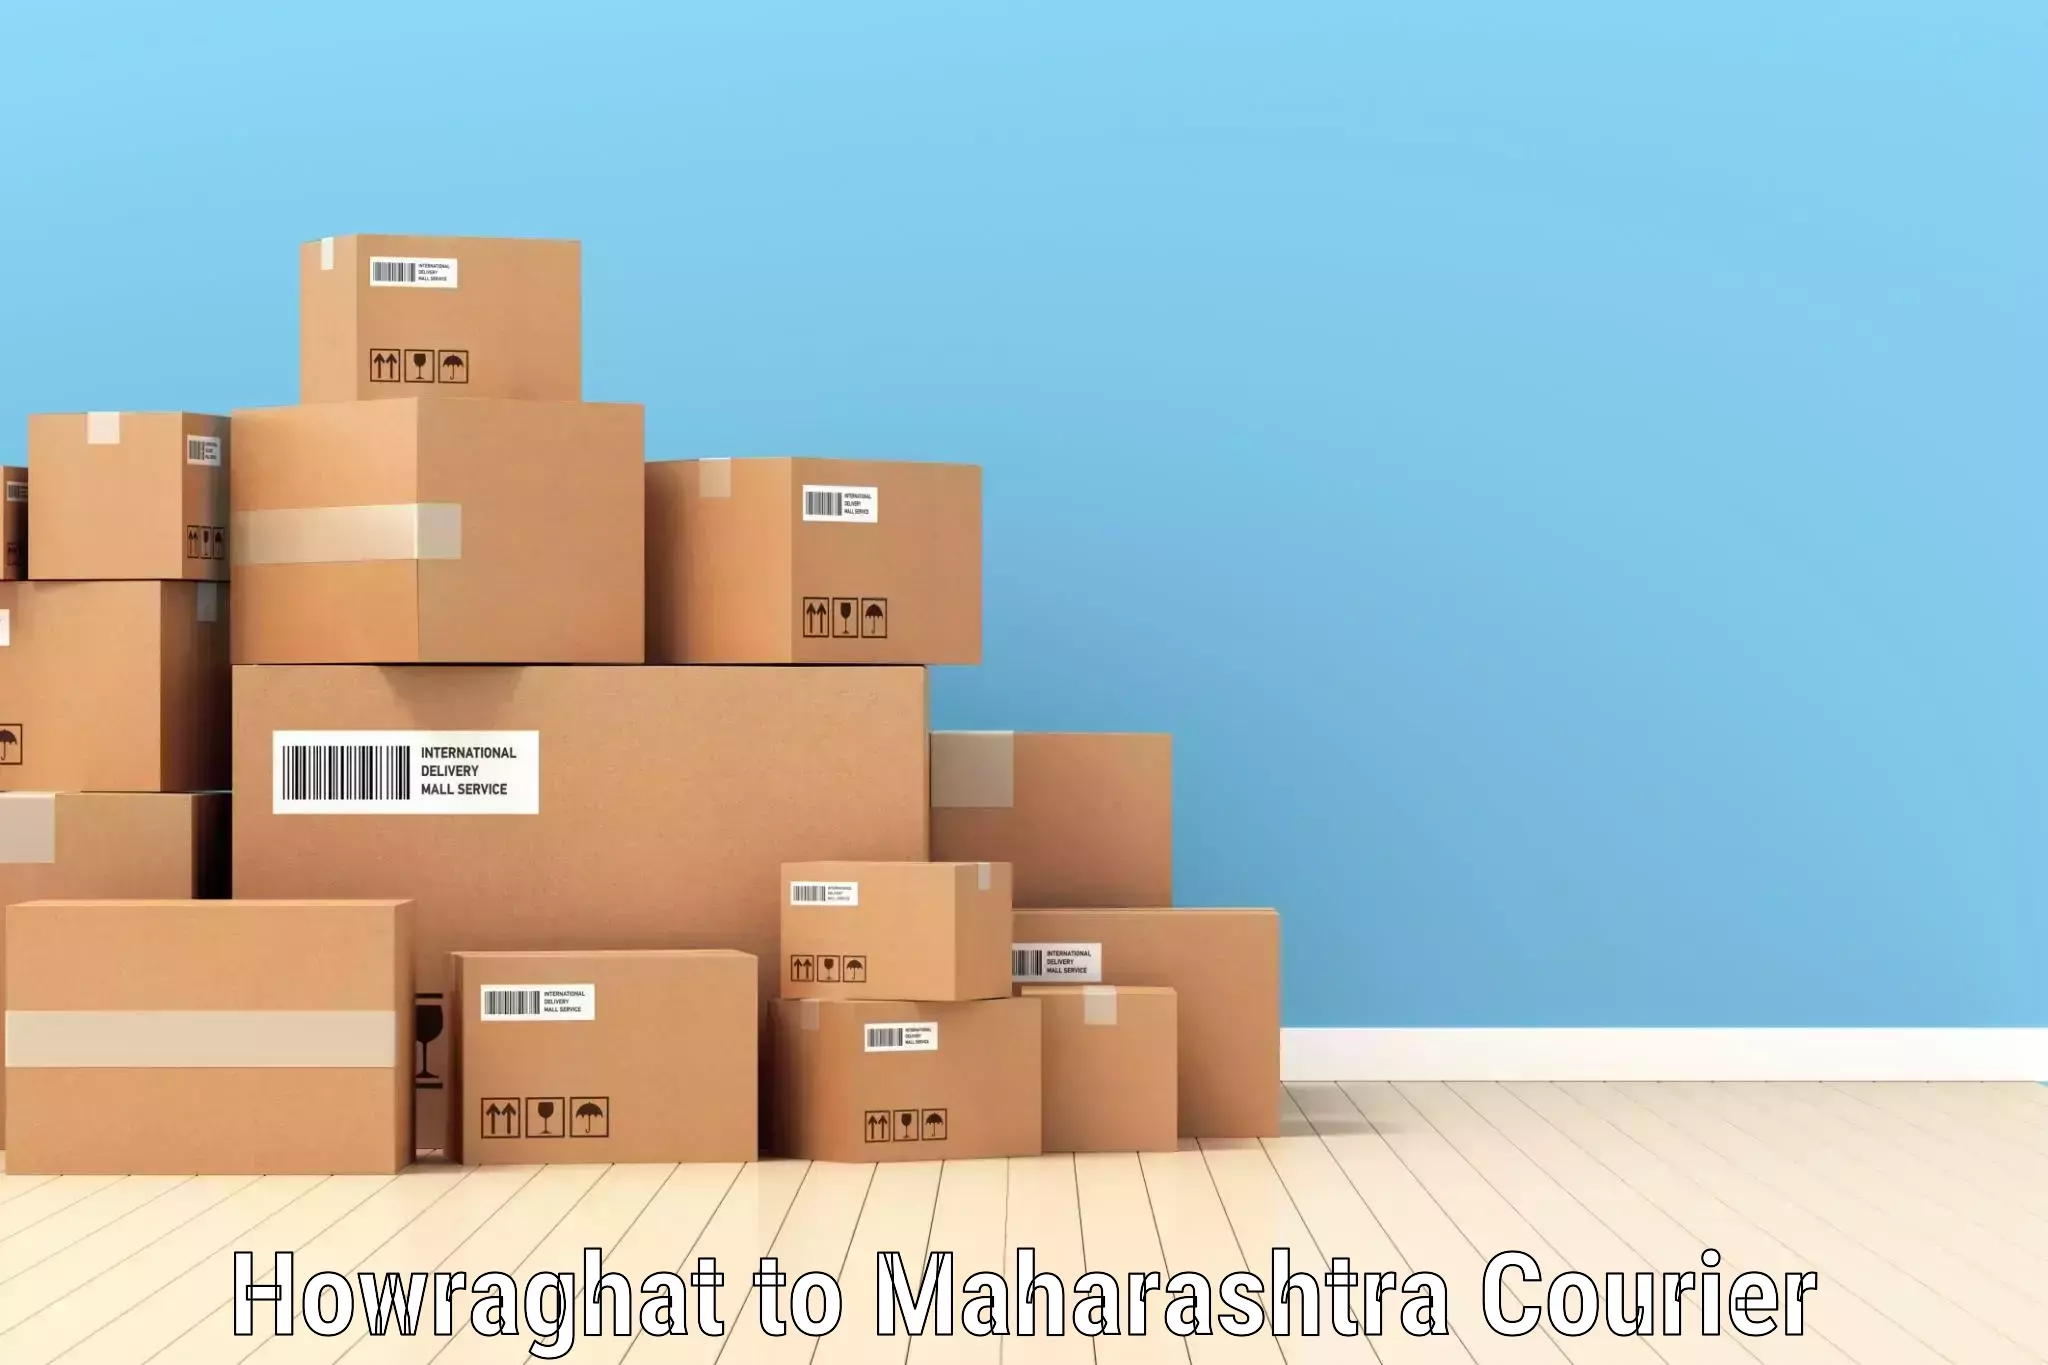 Quality courier partnerships Howraghat to Mira Bhayandar